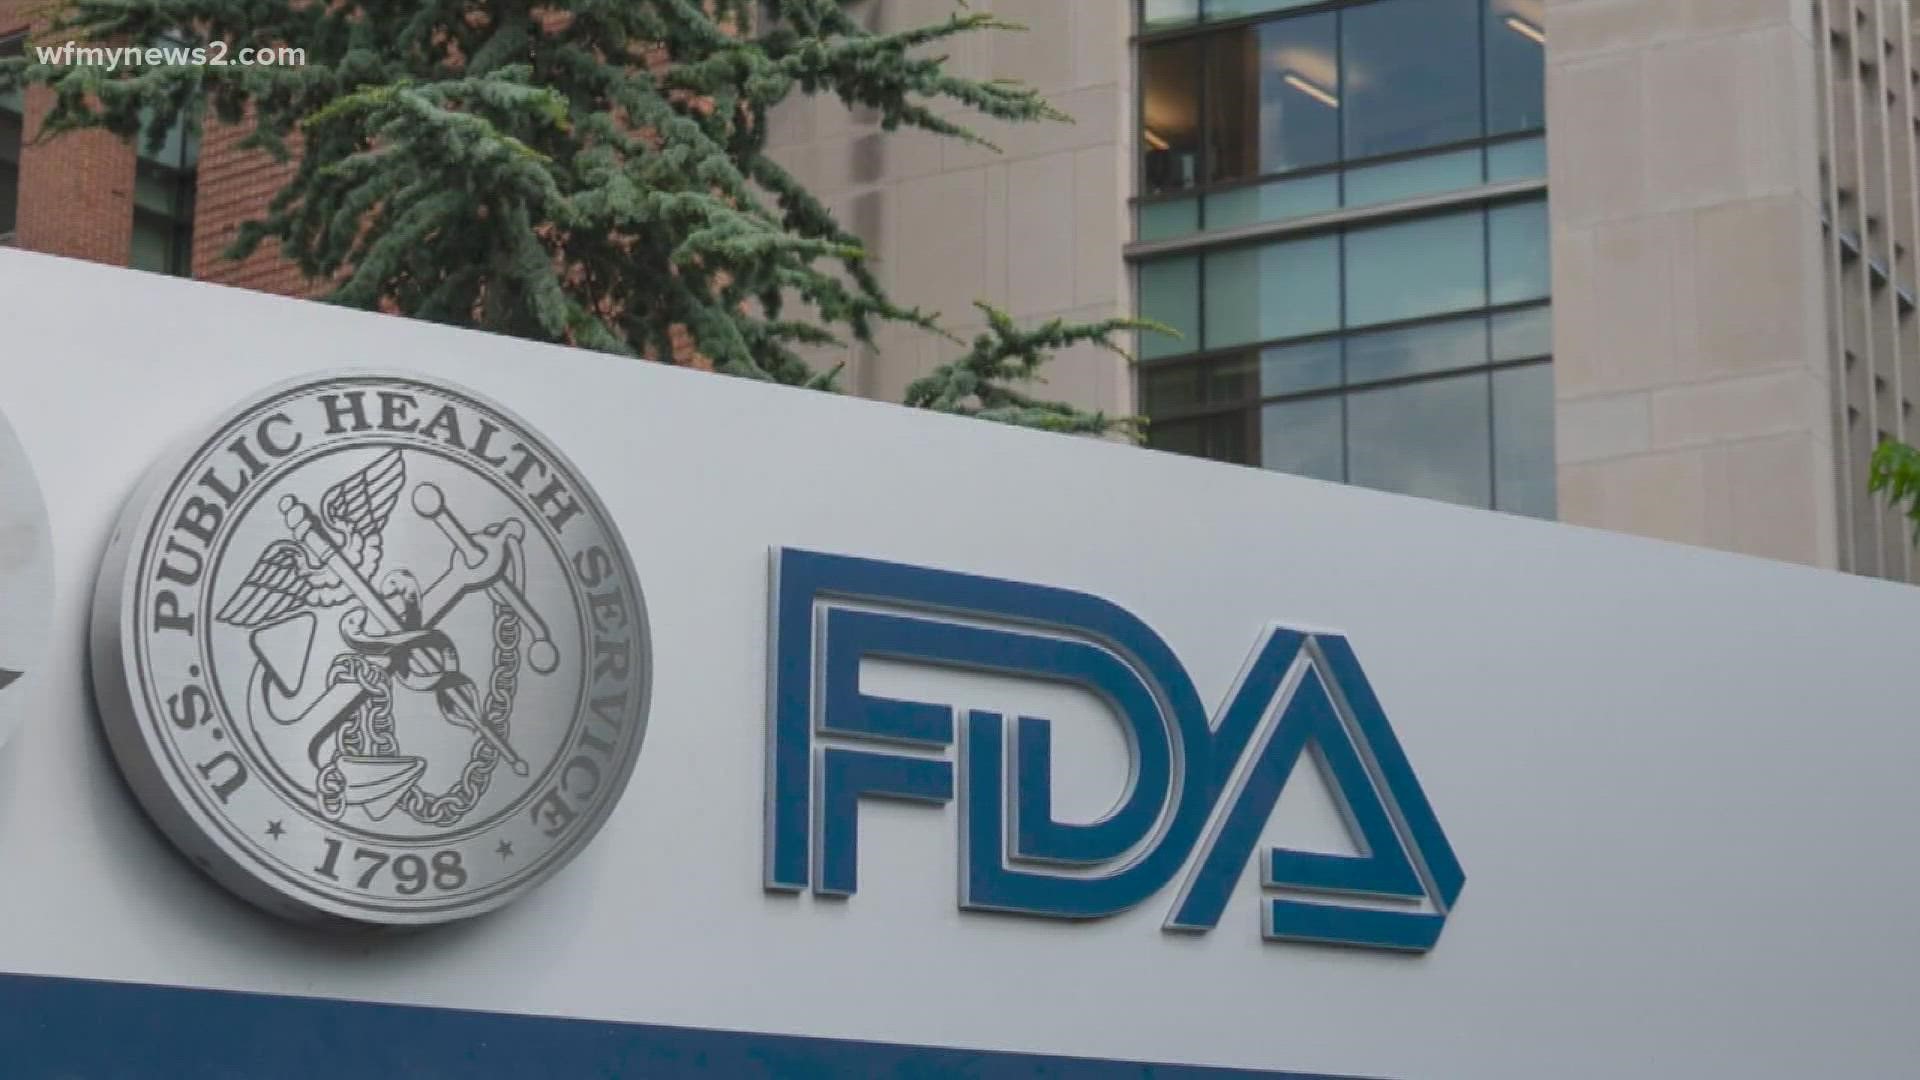 Consumer Reports said the FDA knew about Abbott’s formula problem in September. It didn’t issue a recall until February.